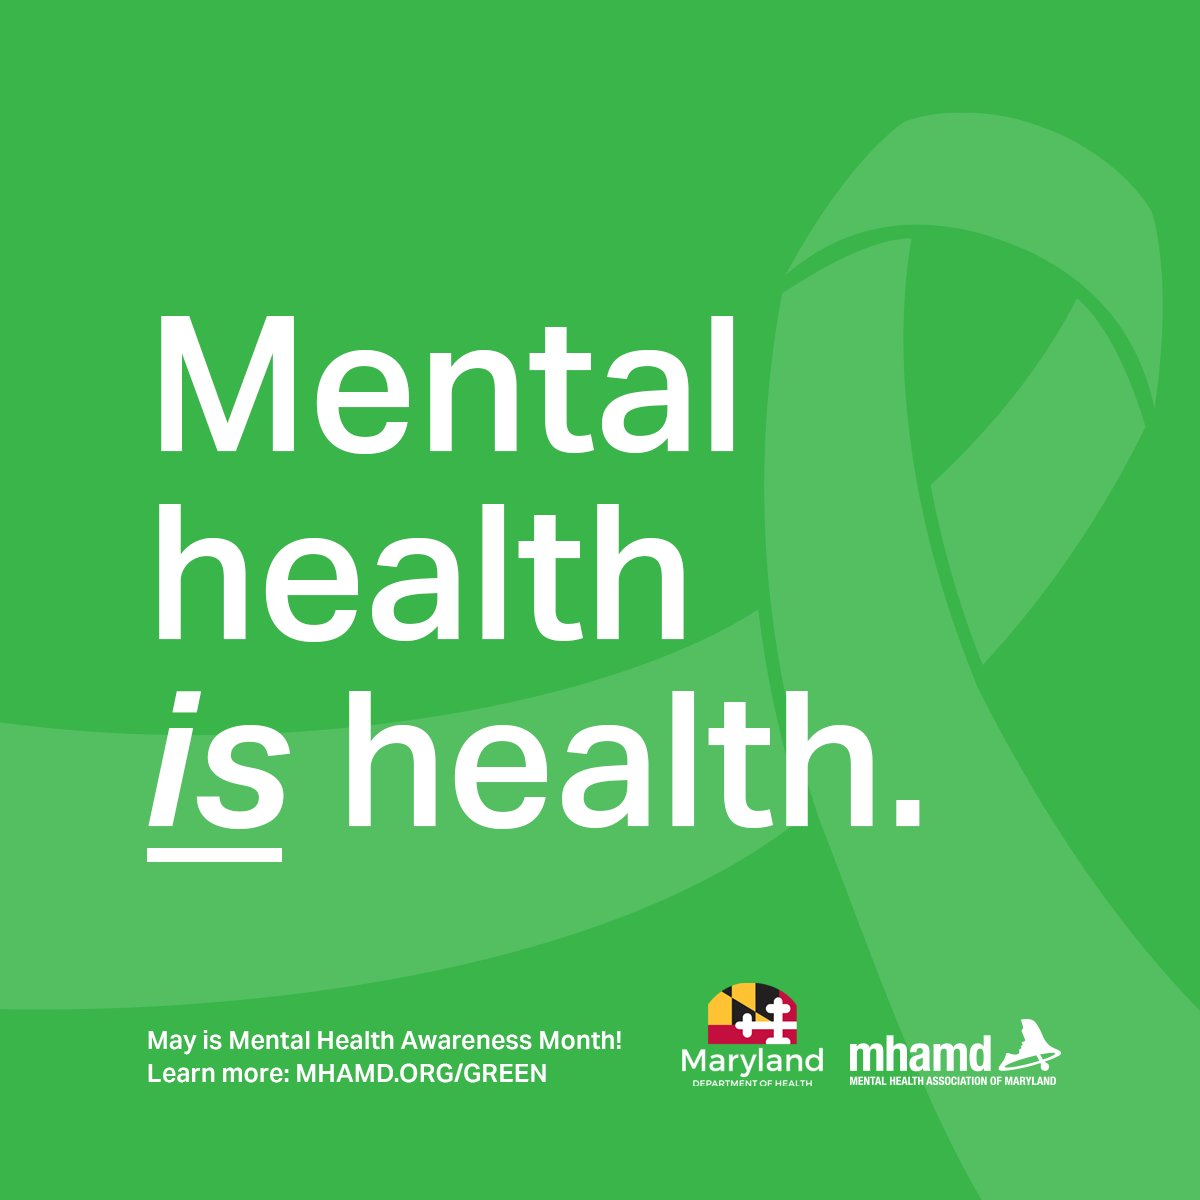 #MentalHealthAwarenessMonth is the perfect time to prioritize your mental health. Visit @mentalhealthMD’s website for more information, resources, and more: mhamd.org/green/